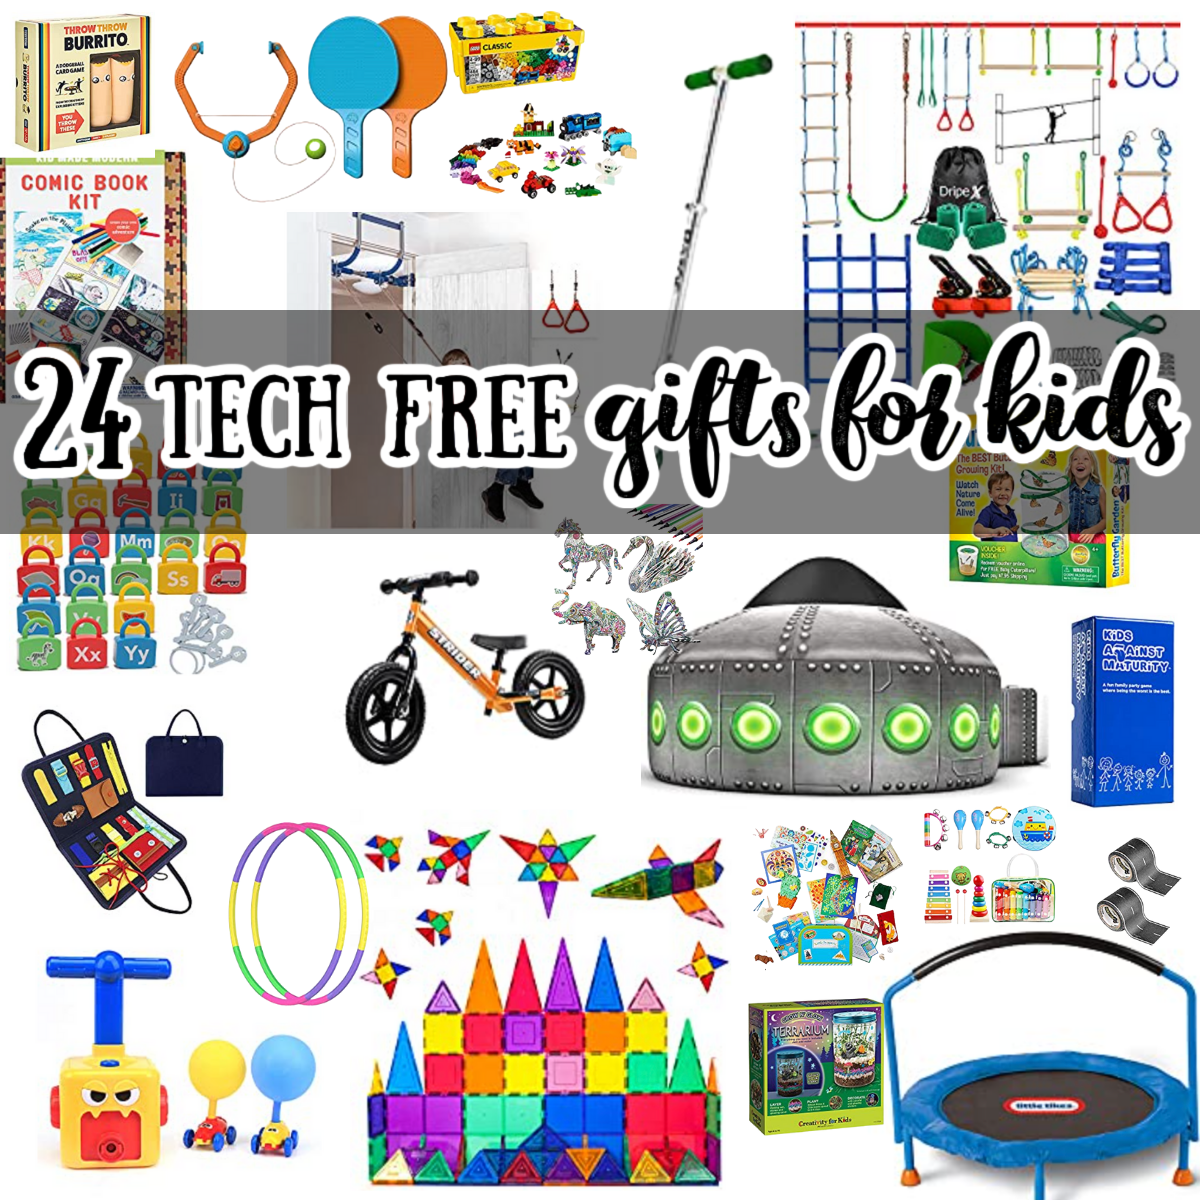 https://feelslikehomeblog.com/wp-content/uploads/2021/10/24-non-tech-gifts-for-kids-tech-free-FB-1.png